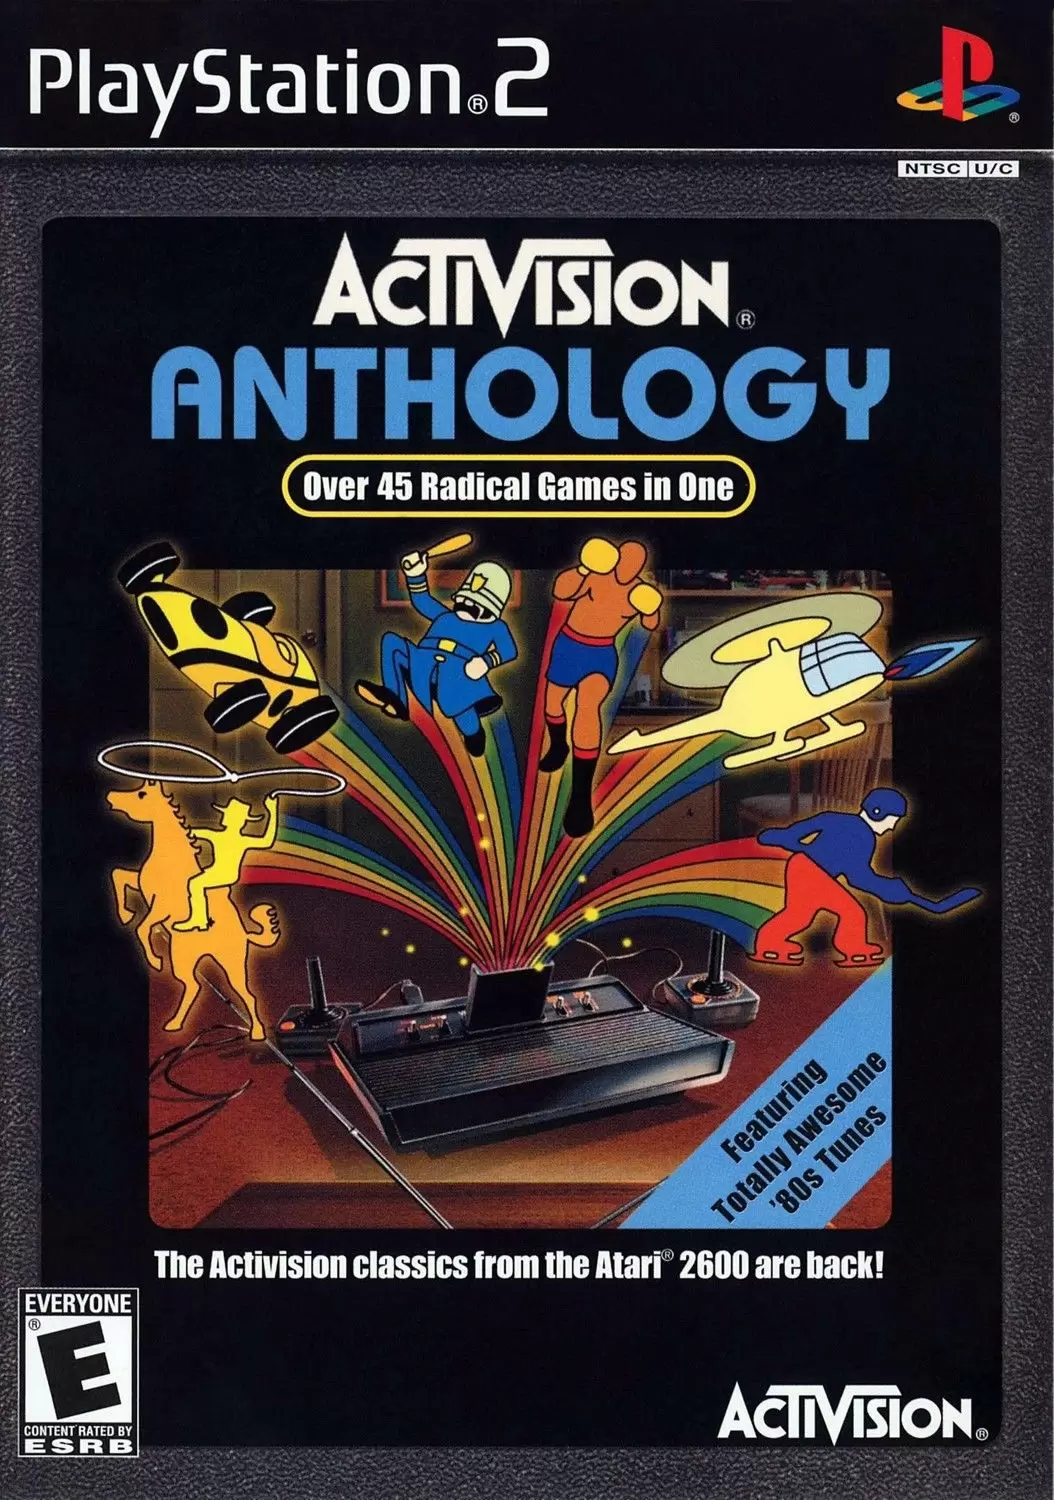 PS2 Games - Activision Anthology